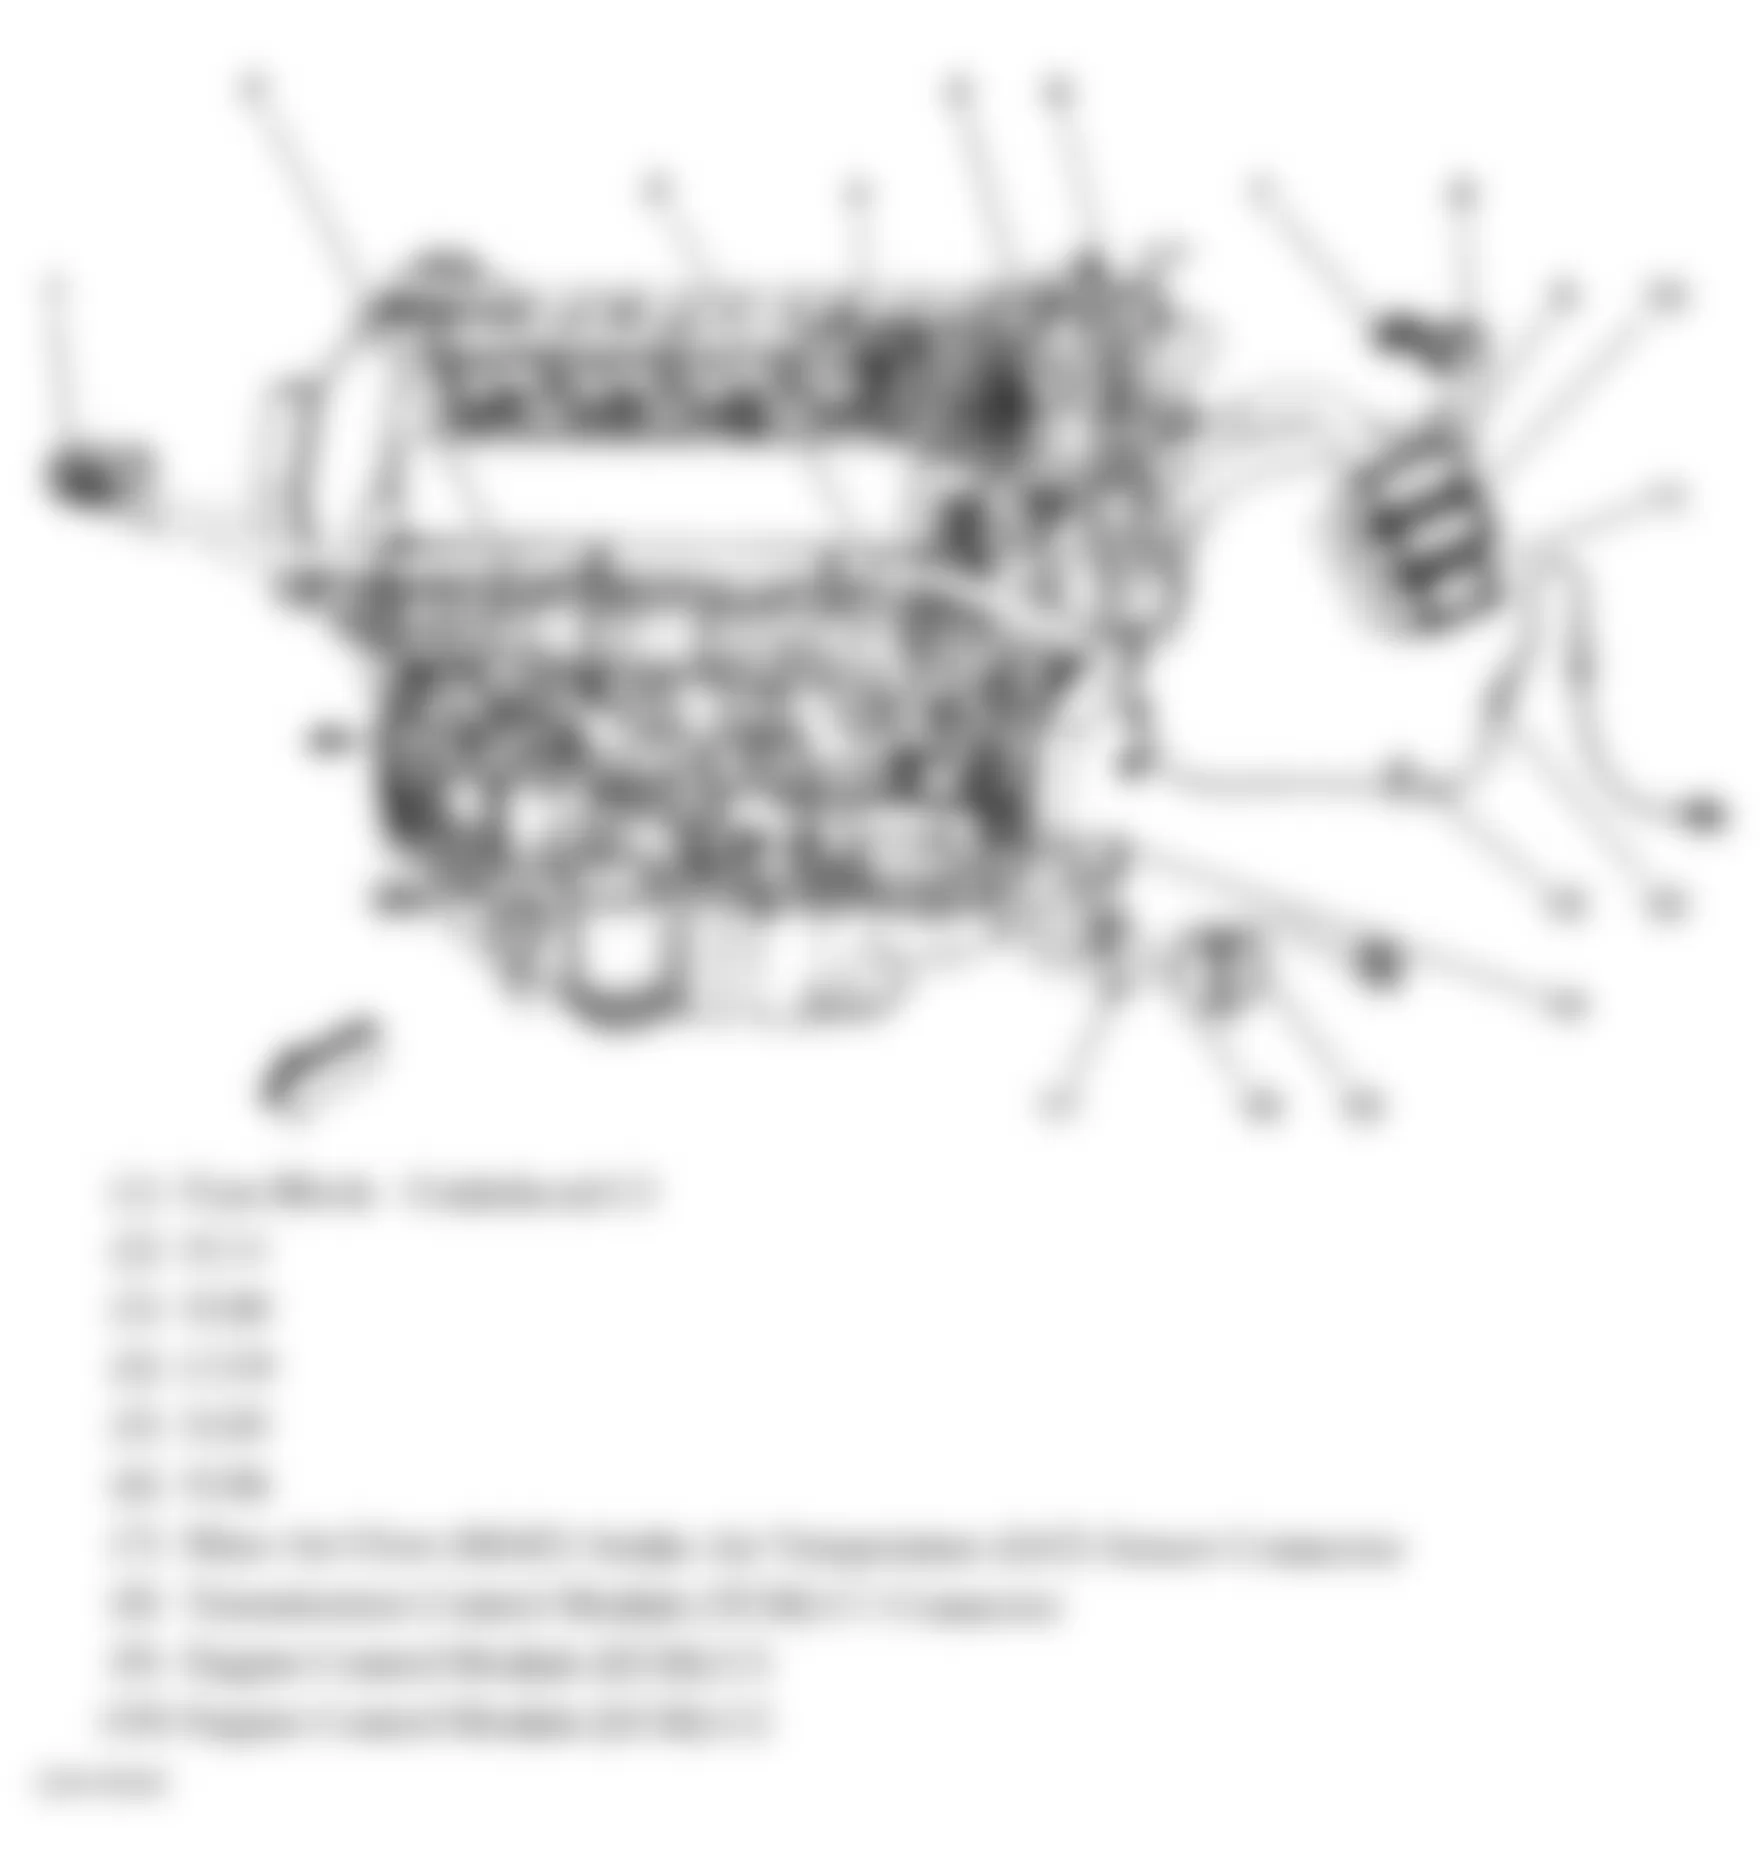 Buick Lucerne CXL 2006 - Component Locations -  Left Side Of Engine (4.6L) (1 Of 2)